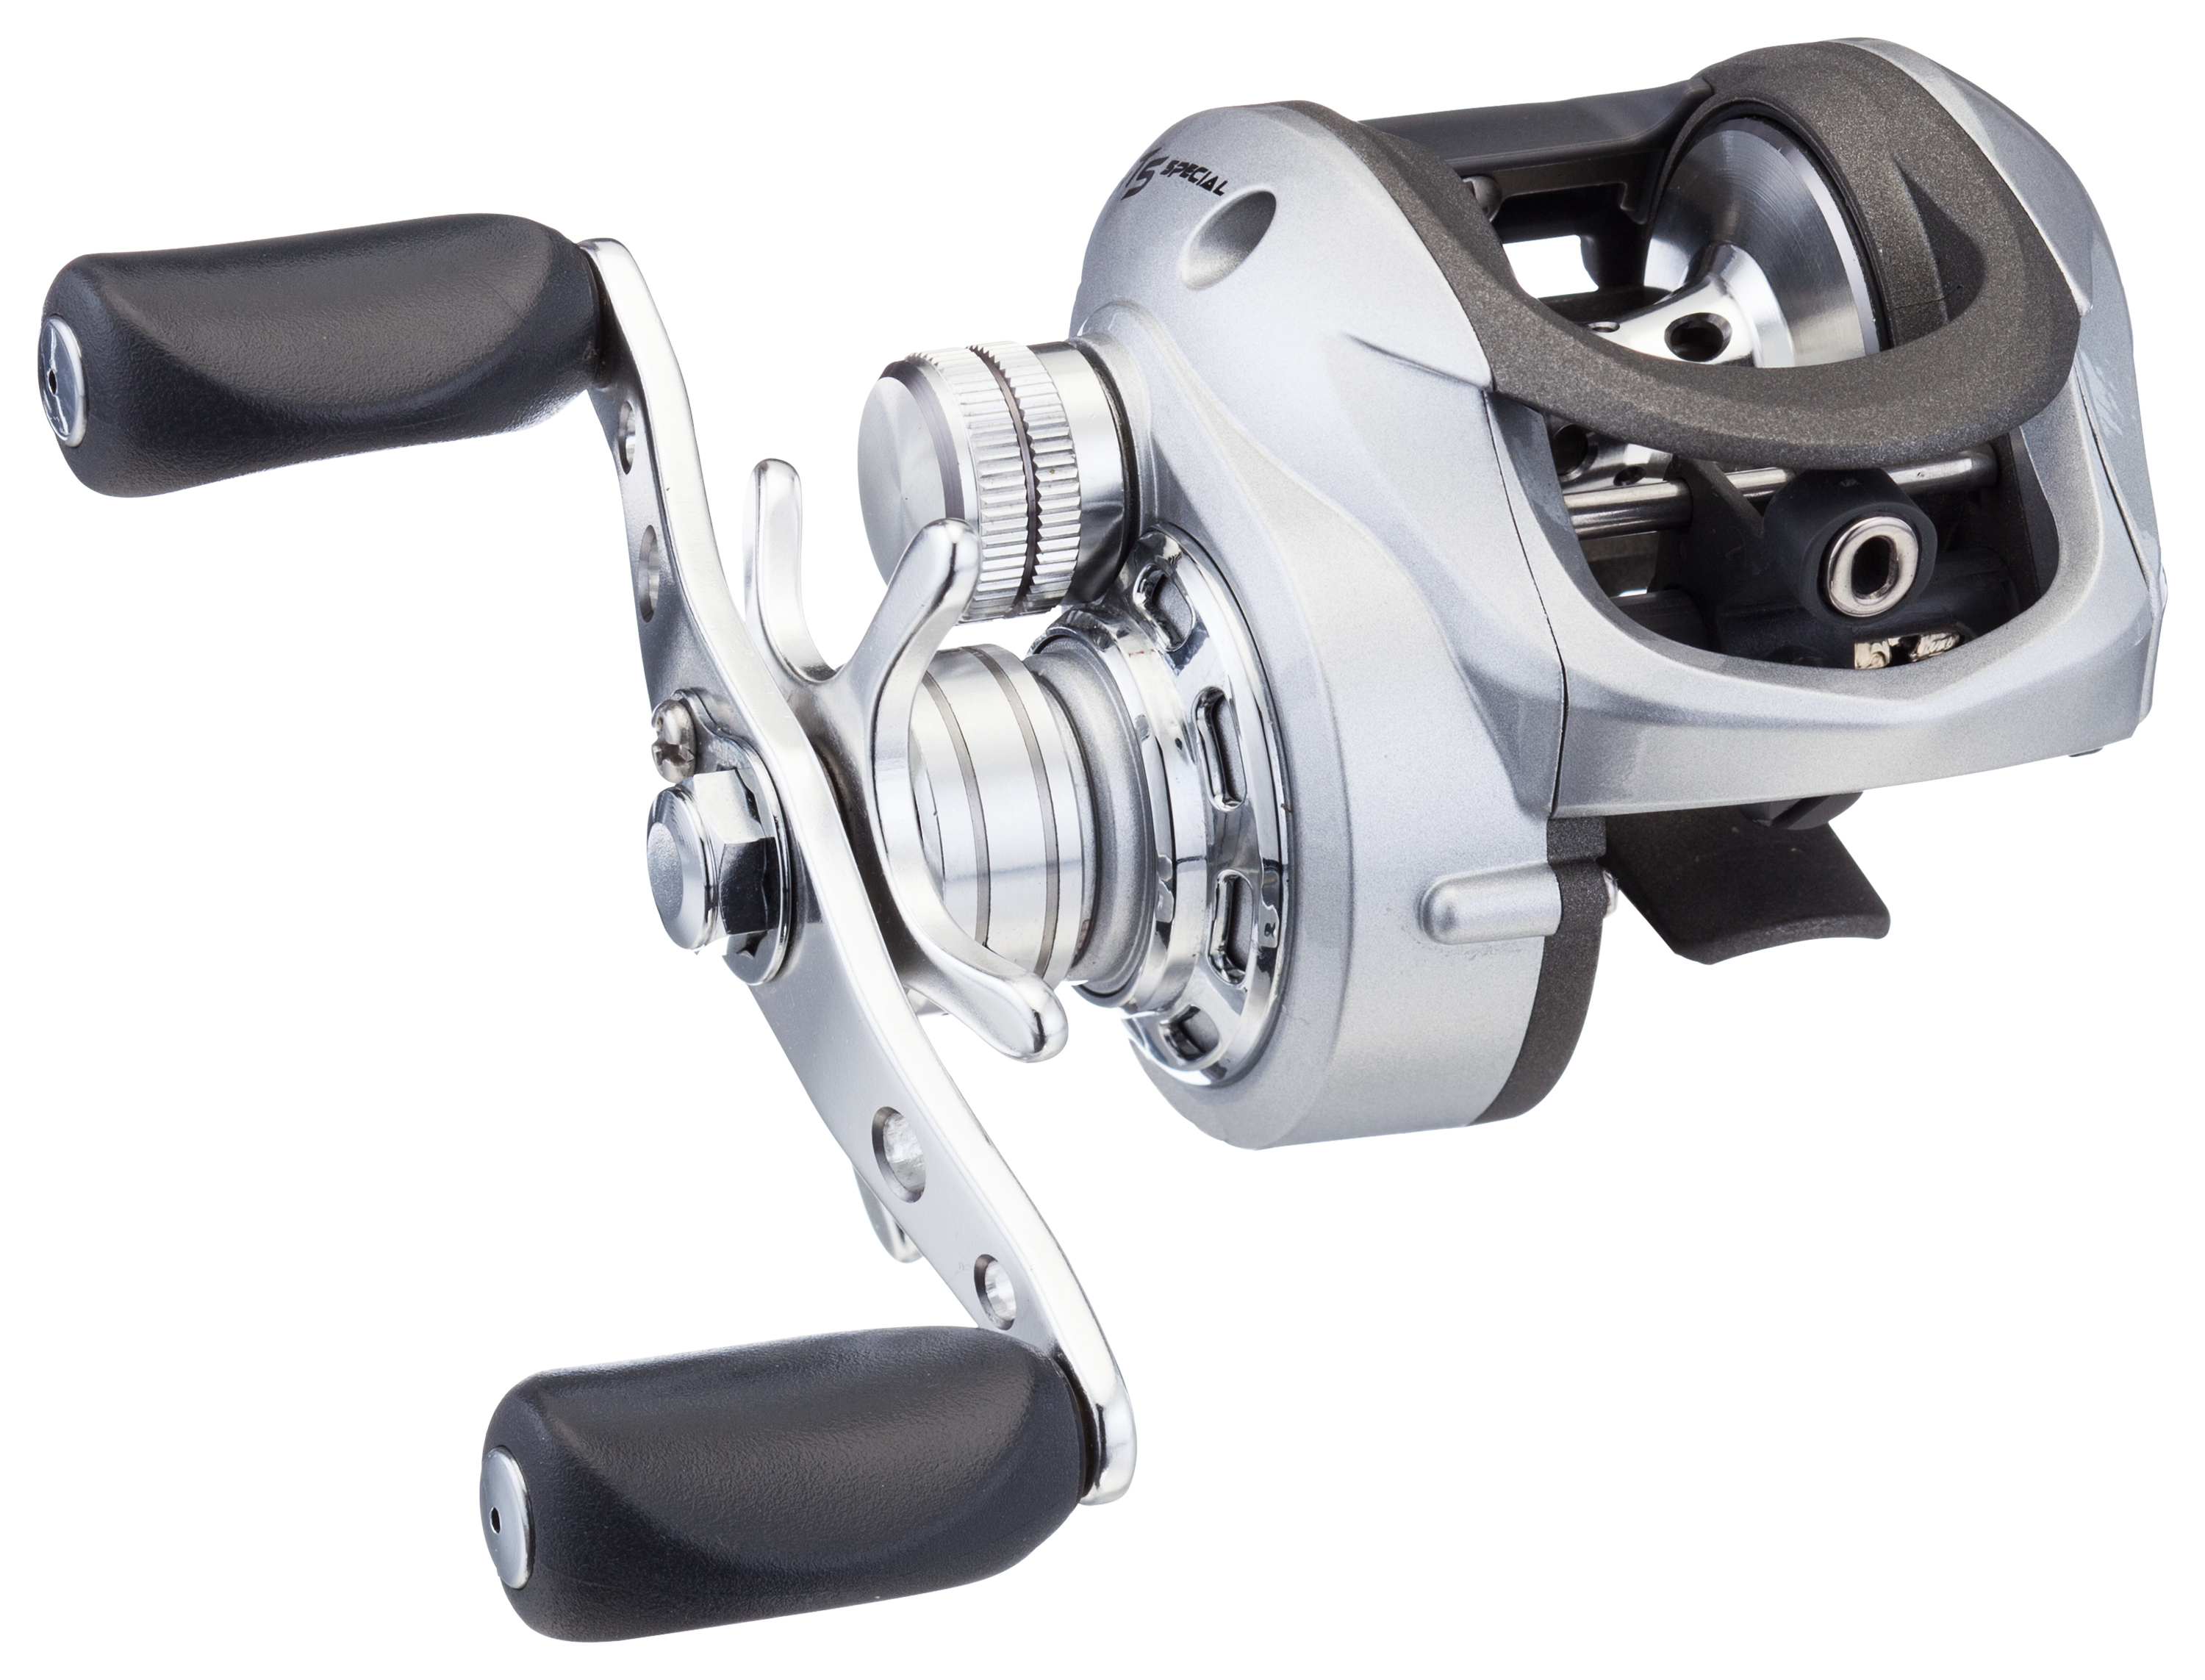 Bass Pro Shops Tourney Special Baitcast Reel - Right - 6.6:1